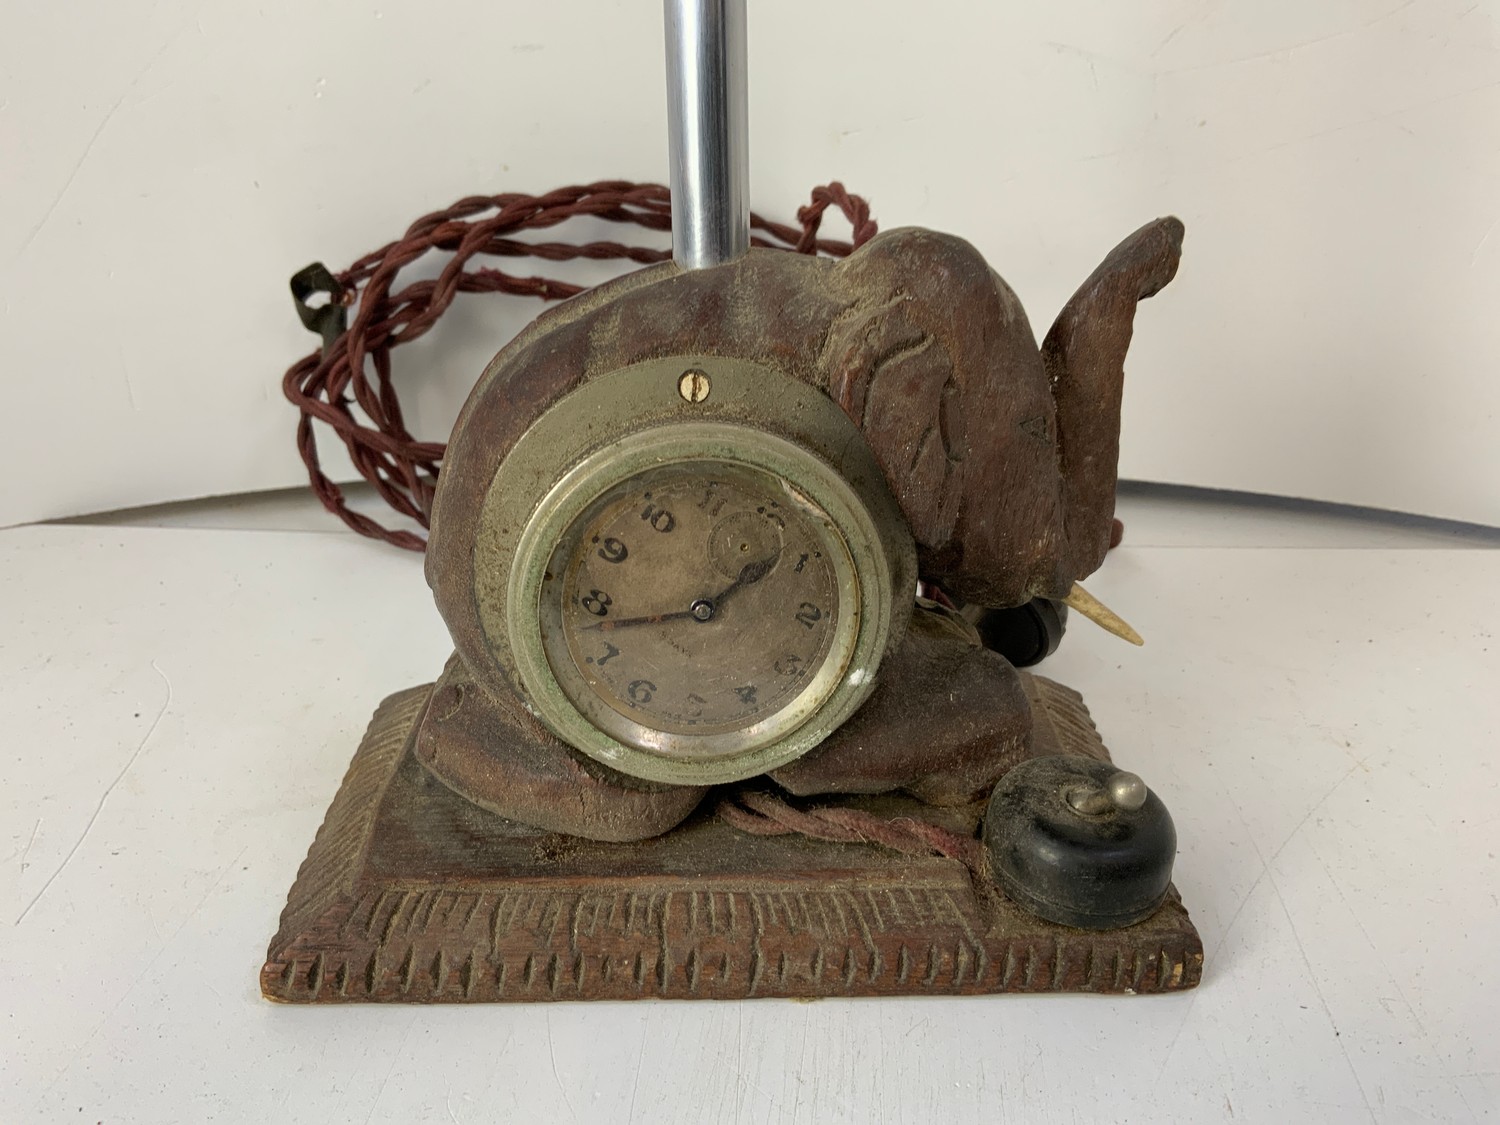 Vintage Elephant Lamp with Clock Insert - Image 2 of 3